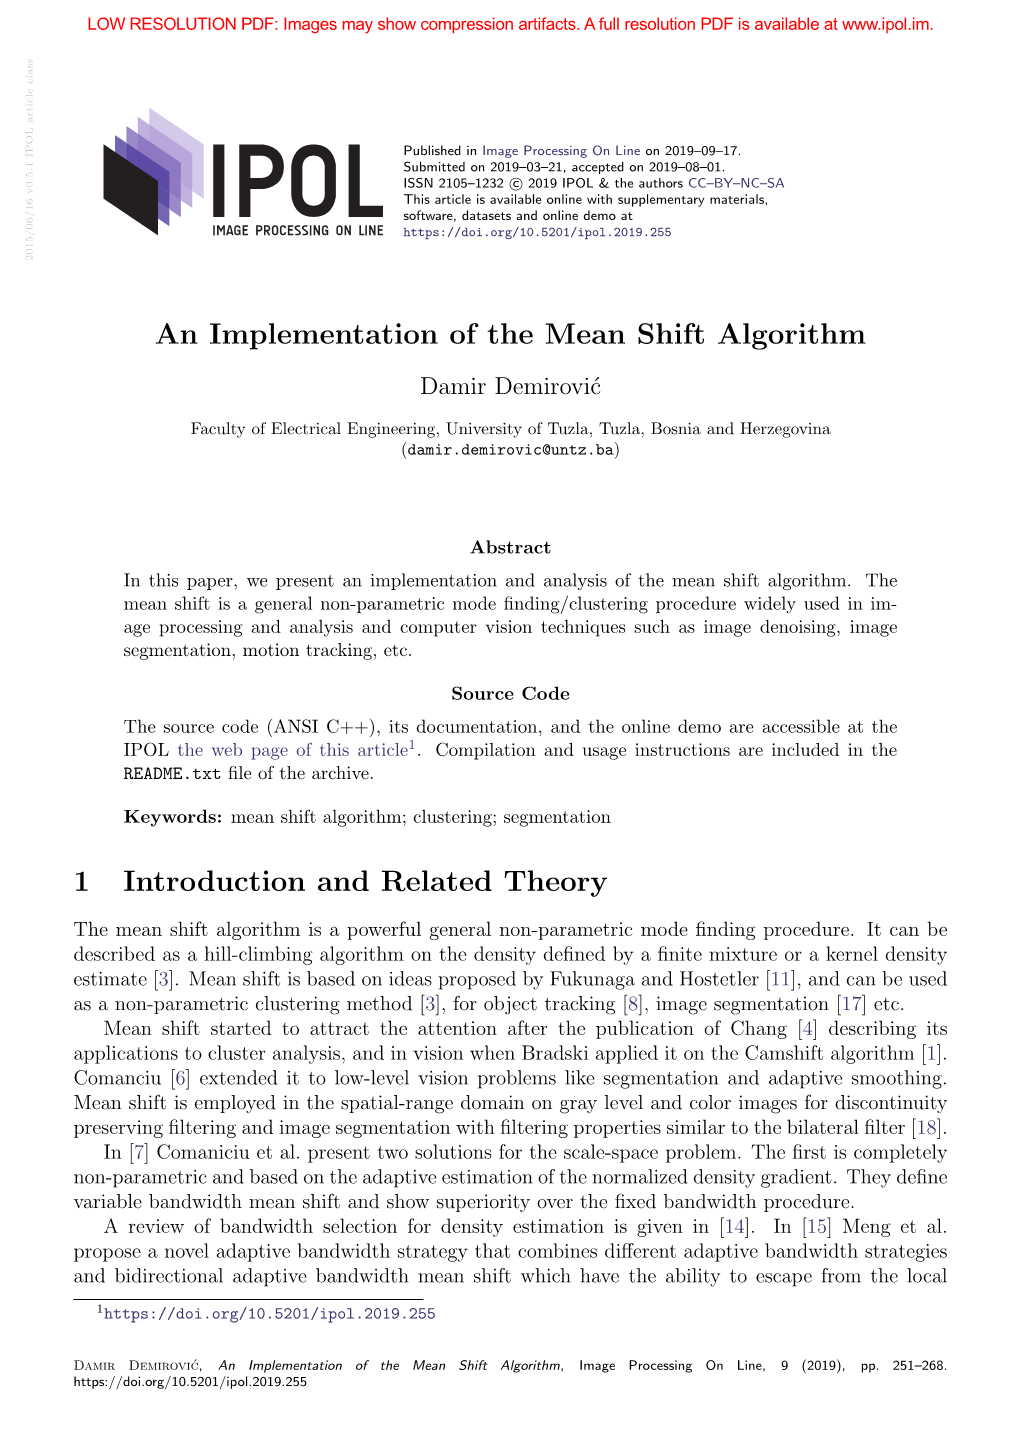 An Implementation of the Mean Shift Algorithm